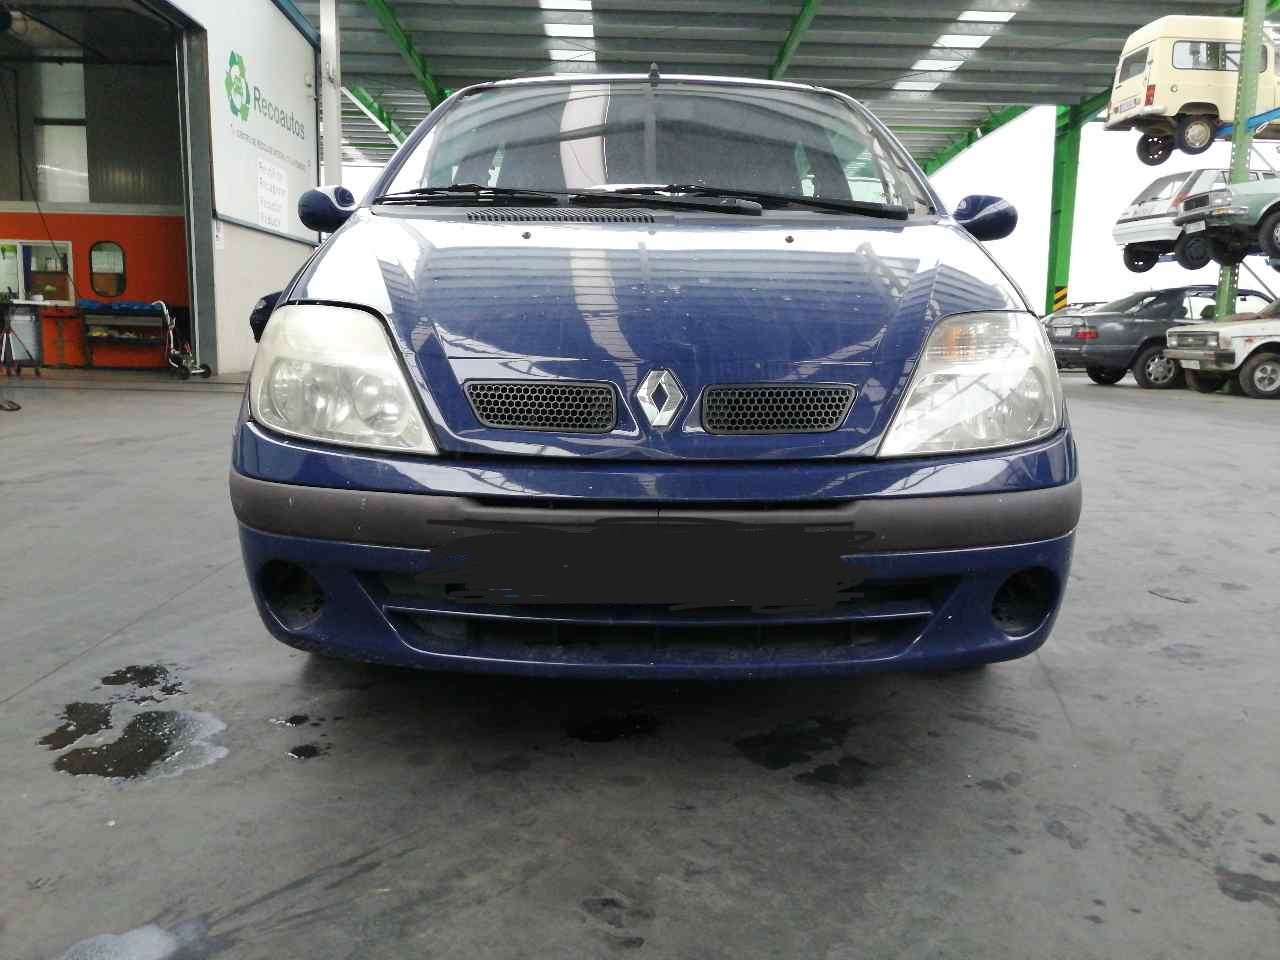 RENAULT Megane 1 generation (1995-2003) Other Body Parts 8200000900, 2PIN 19833356